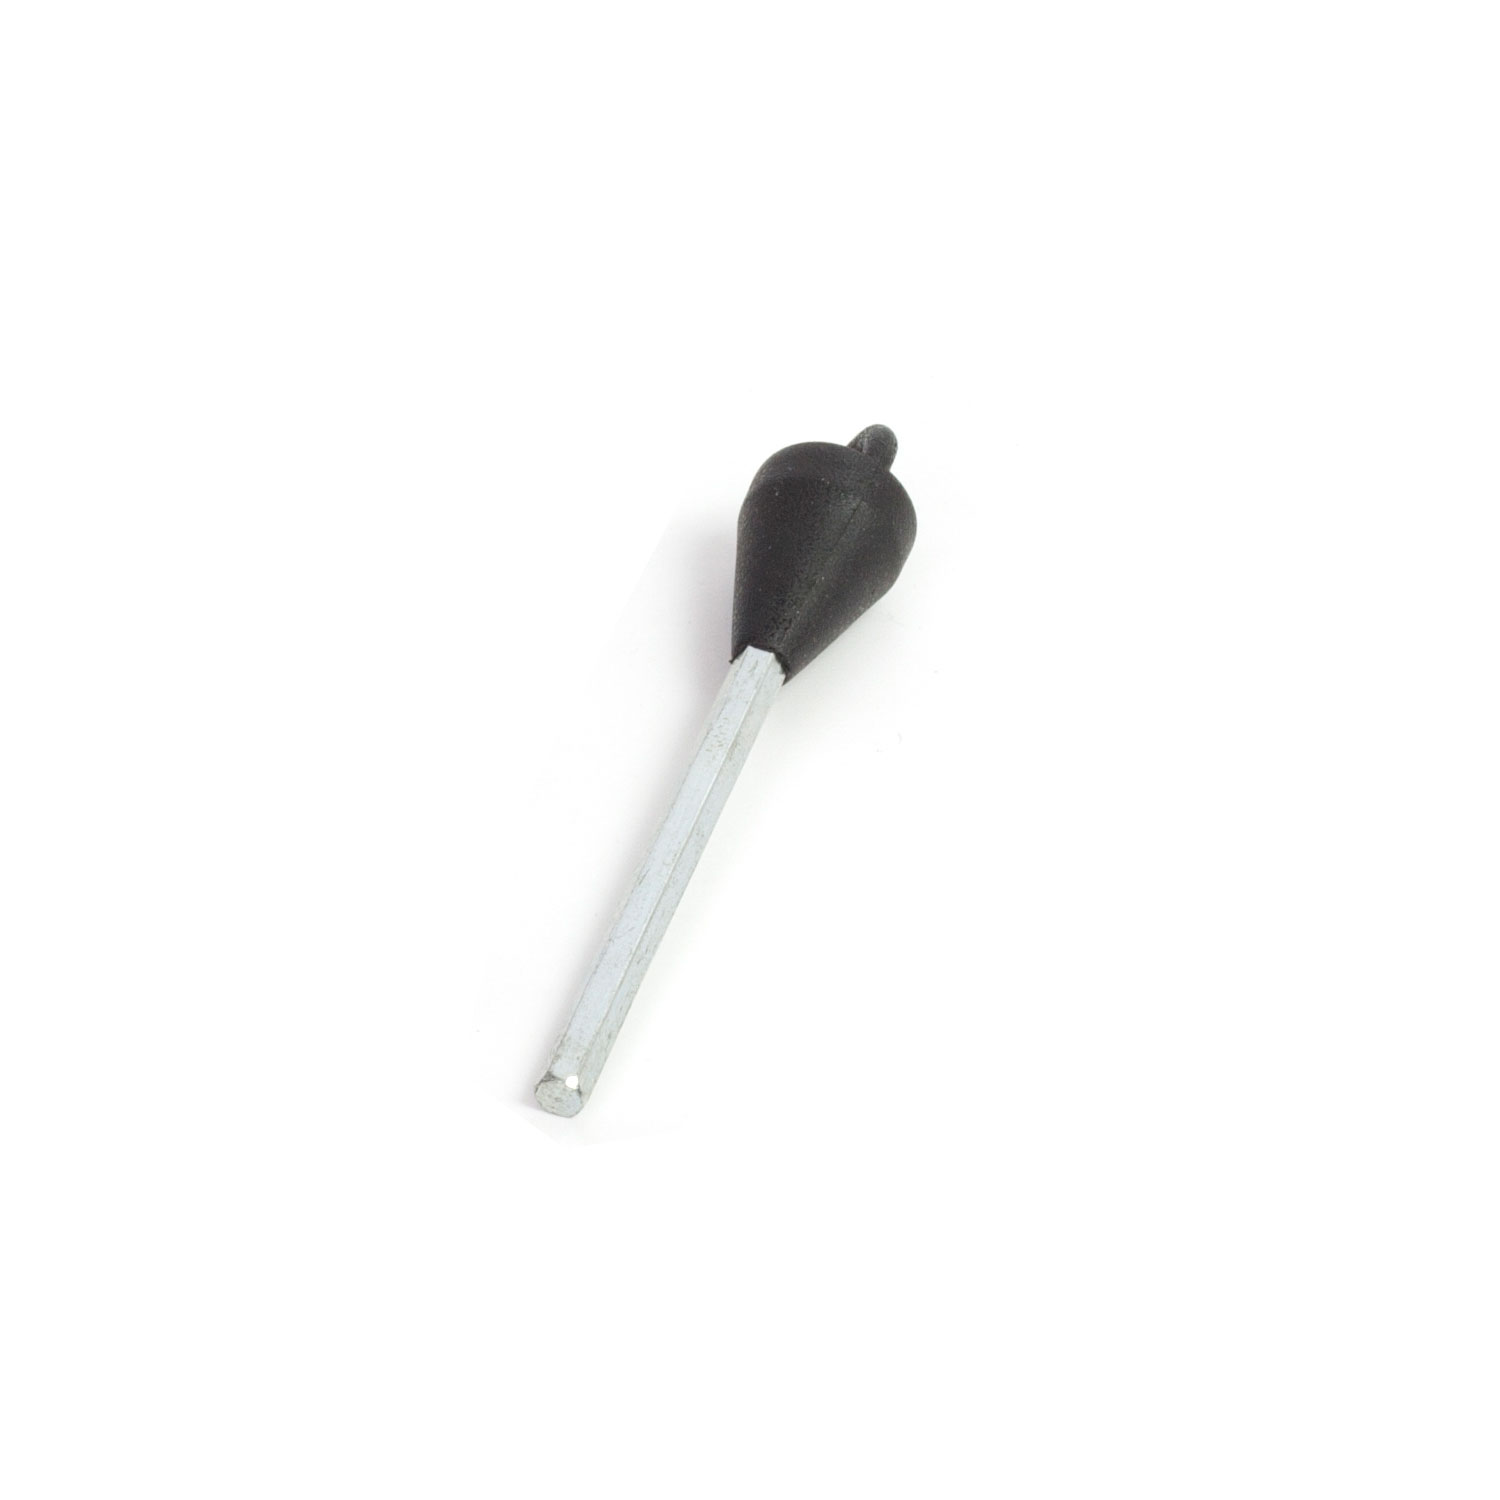 Replacement Allen Key for the Monkey Tail and Tear Drop Window Handle